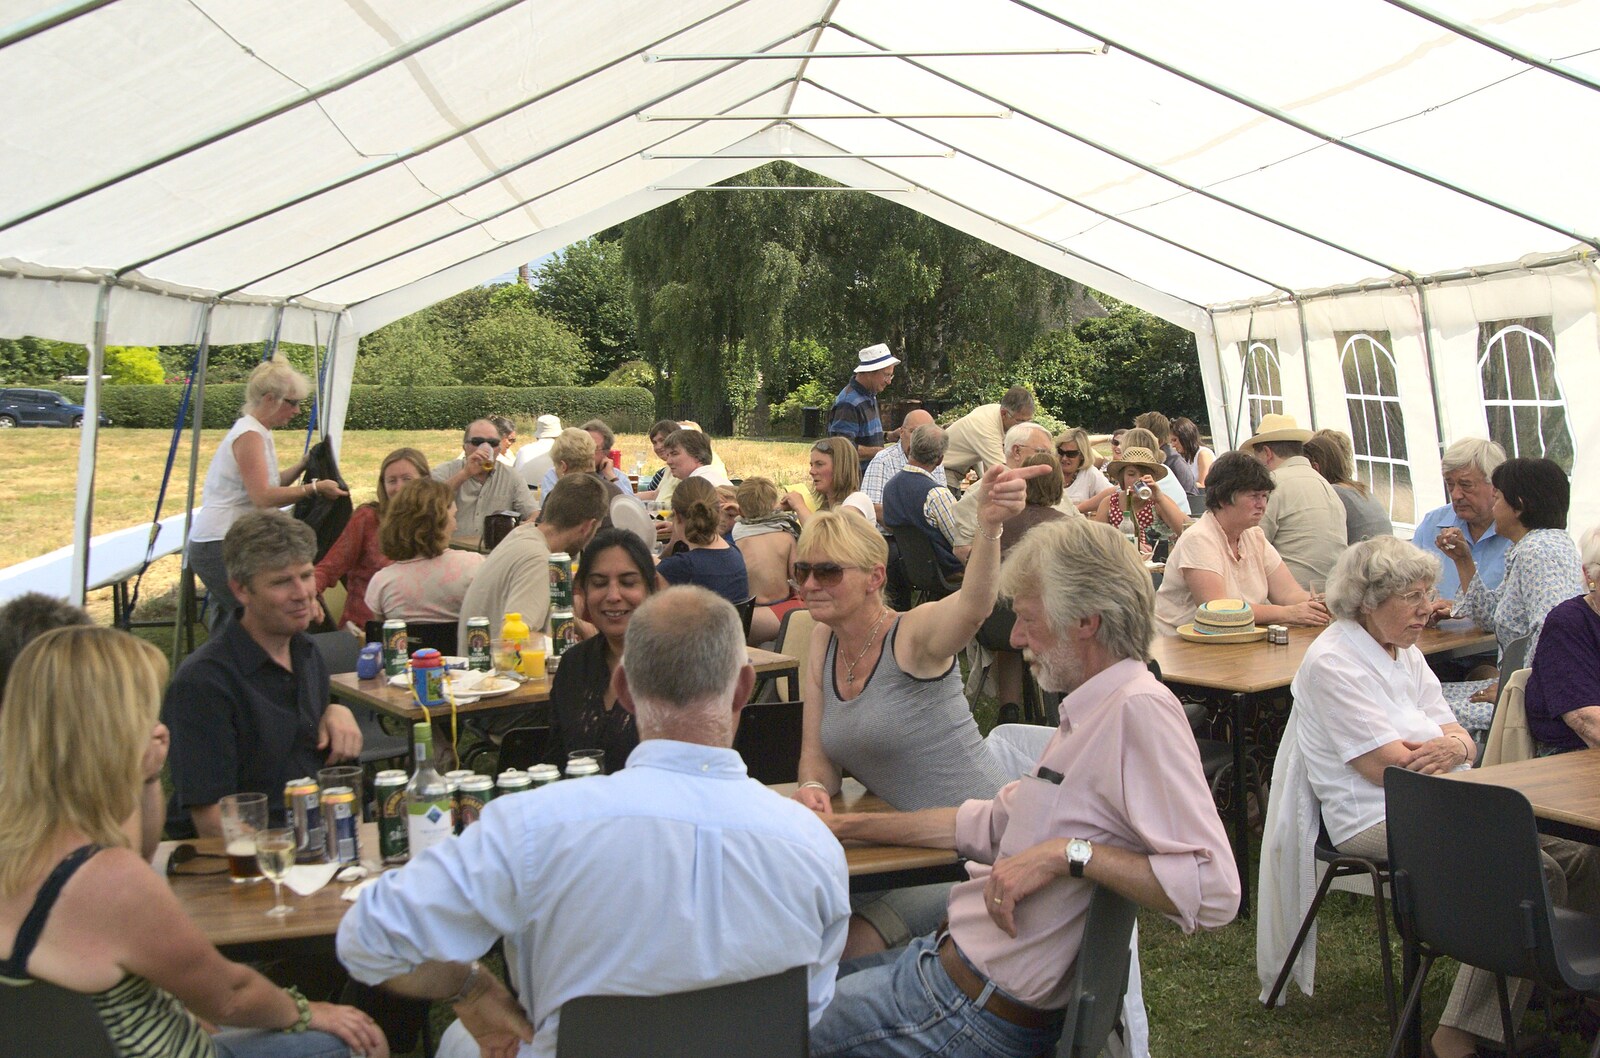 The marquee is packed from Thrandeston Pig: A Hog Roast, Little Green, Thrandeston, Suffolk - 29th June 2009